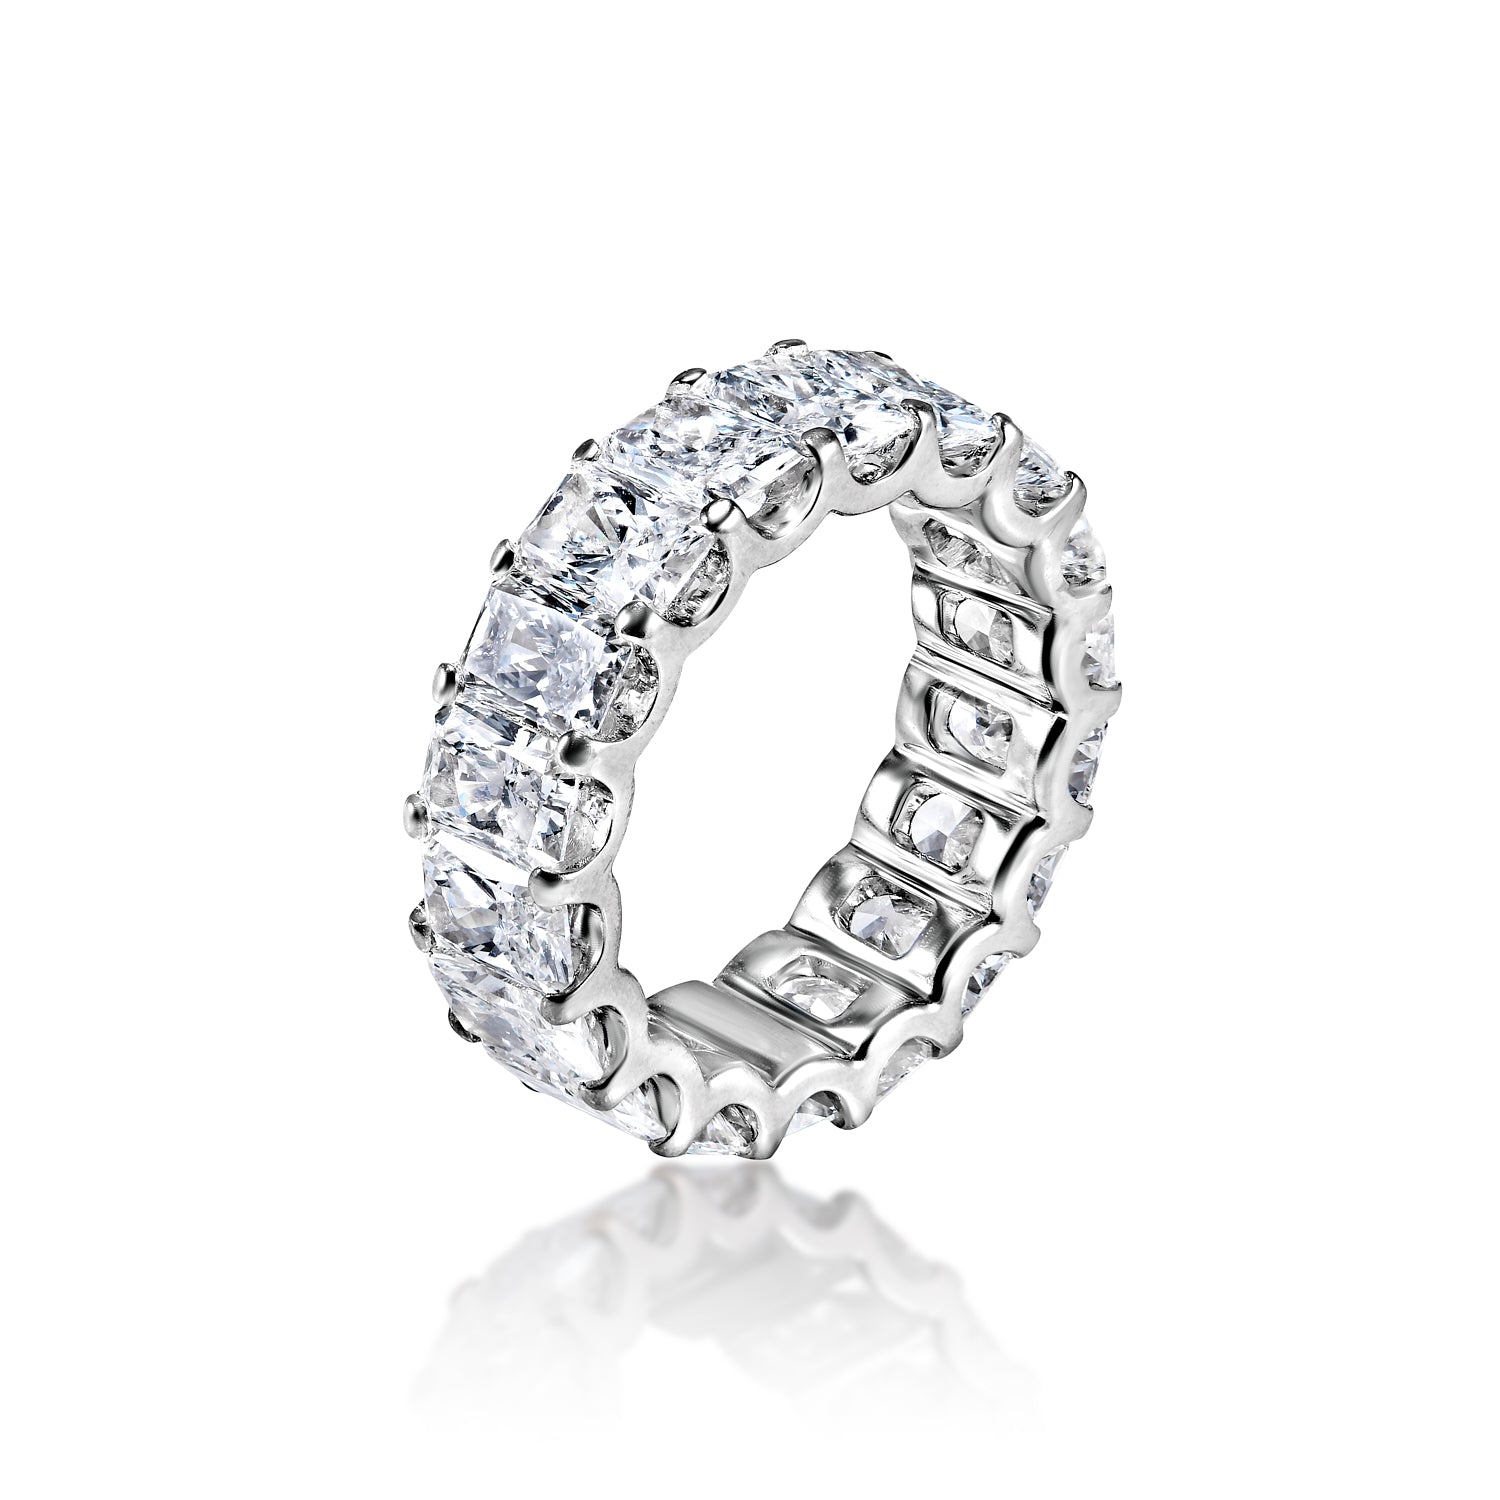 Popular styles for Eternity Band